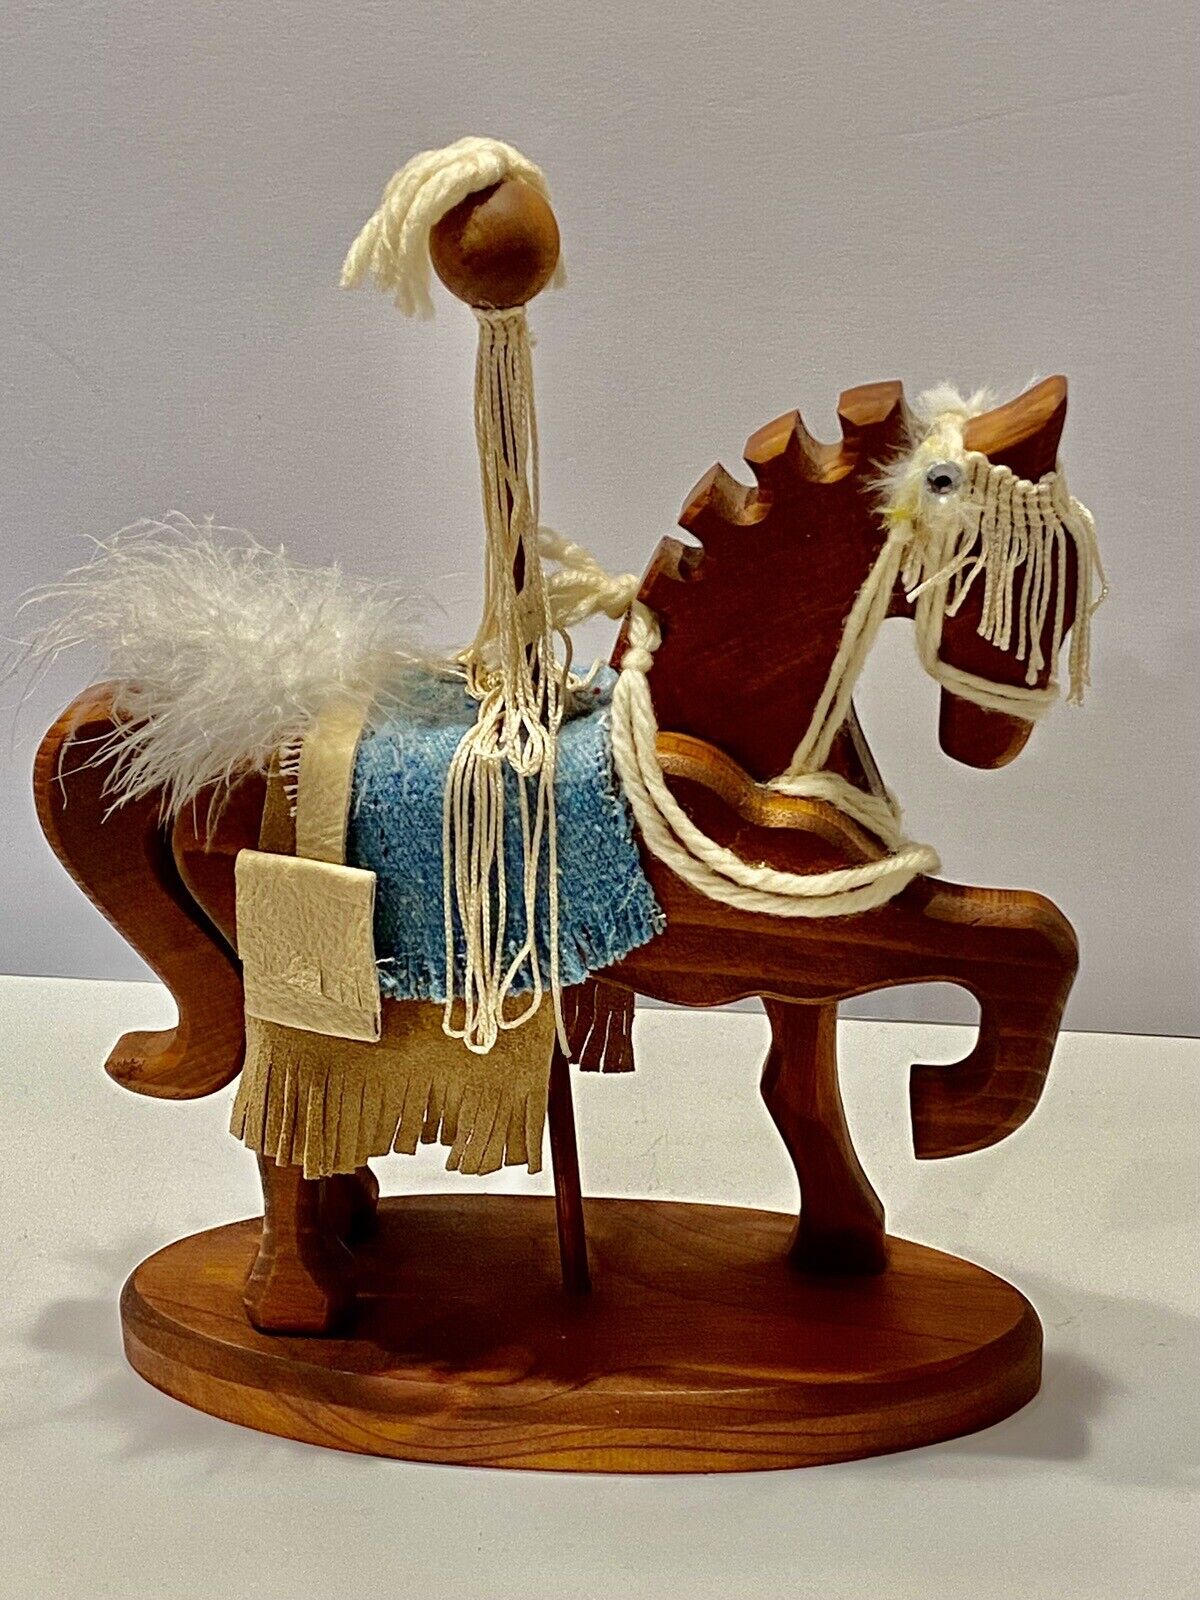 1992 Signed Wood Carousel Horse On Base Decor Natural Materials USA Handcrafted